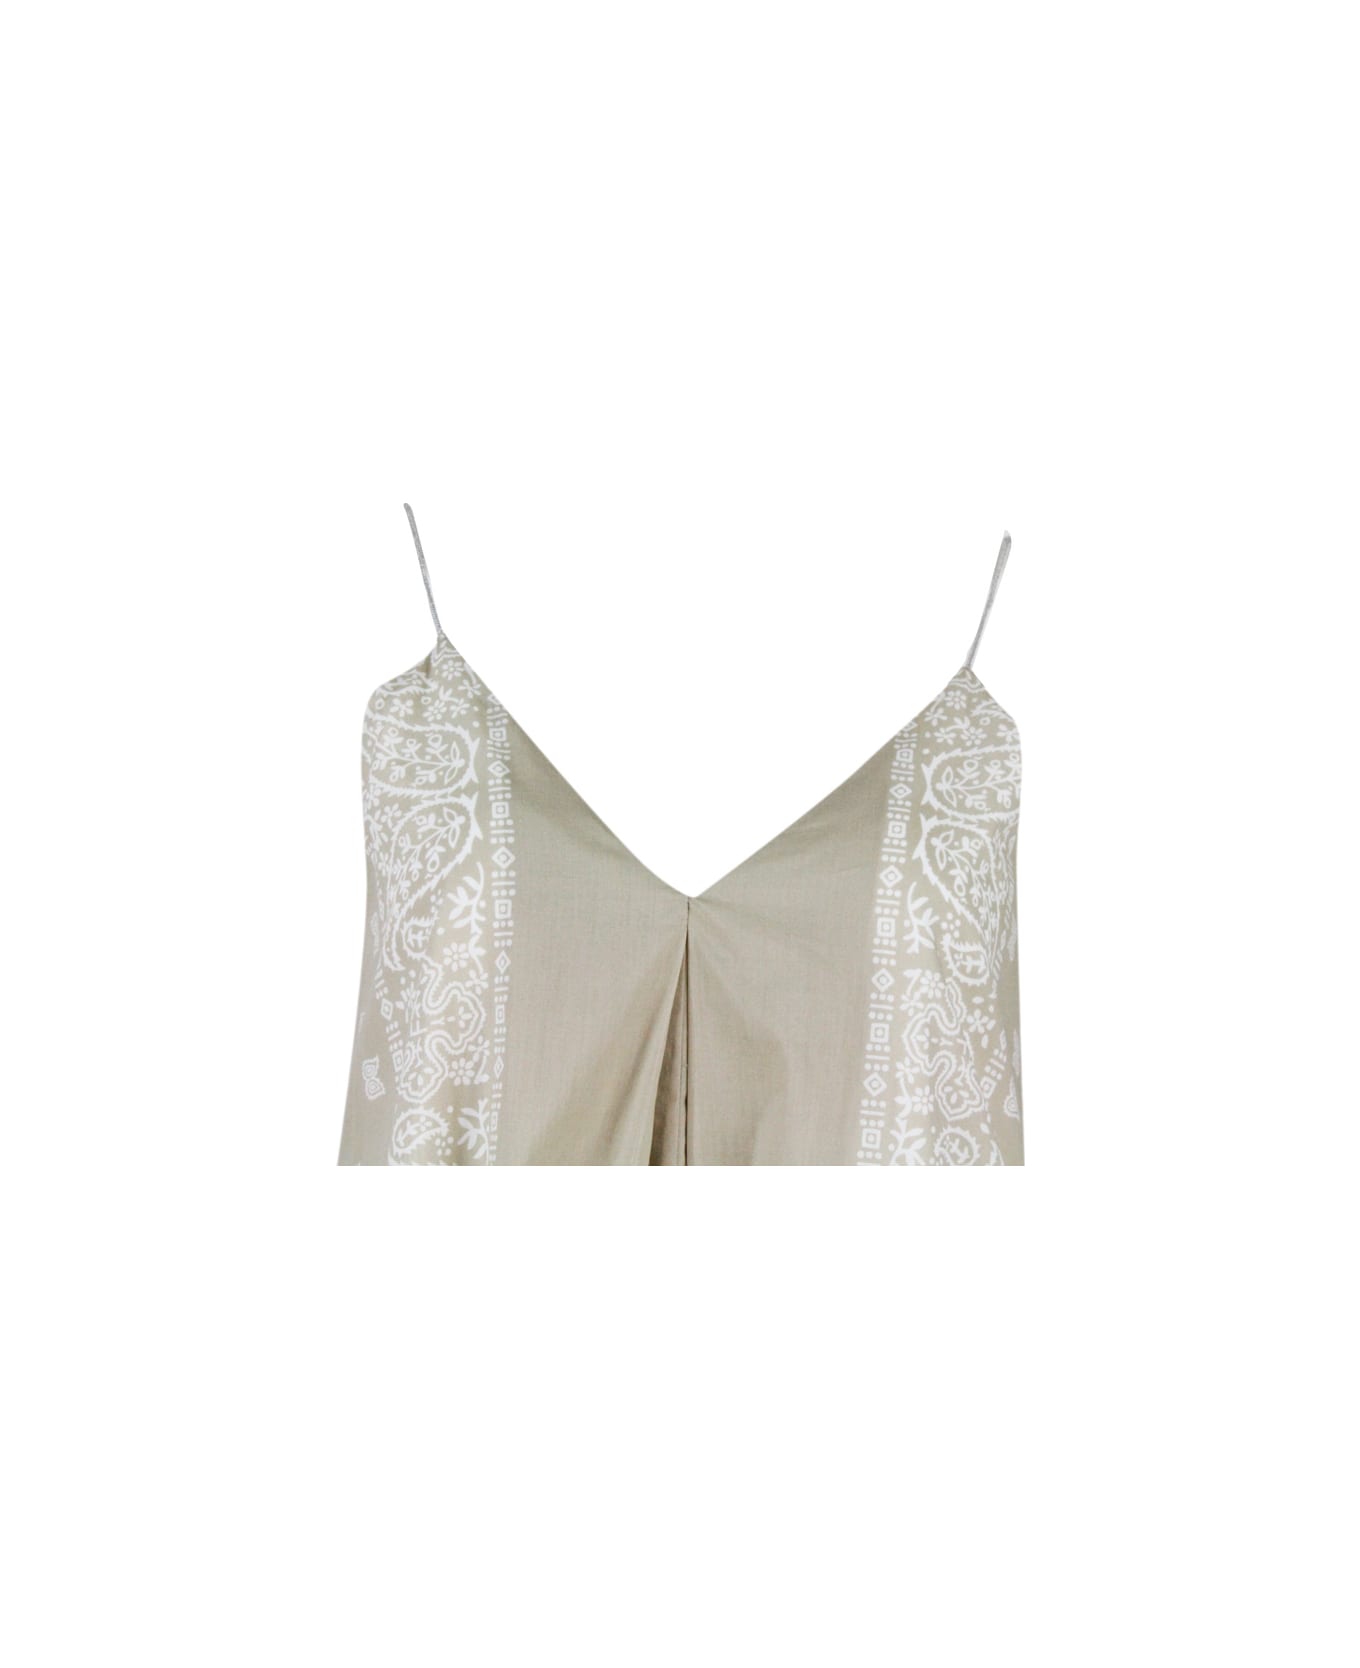 Fabiana Filippi Long Dress In Cotton With Bandana Fantasy Print From The Asymmetrical A-line With Shoulder Straps In Rows Of Brilliant Jewels - Beige